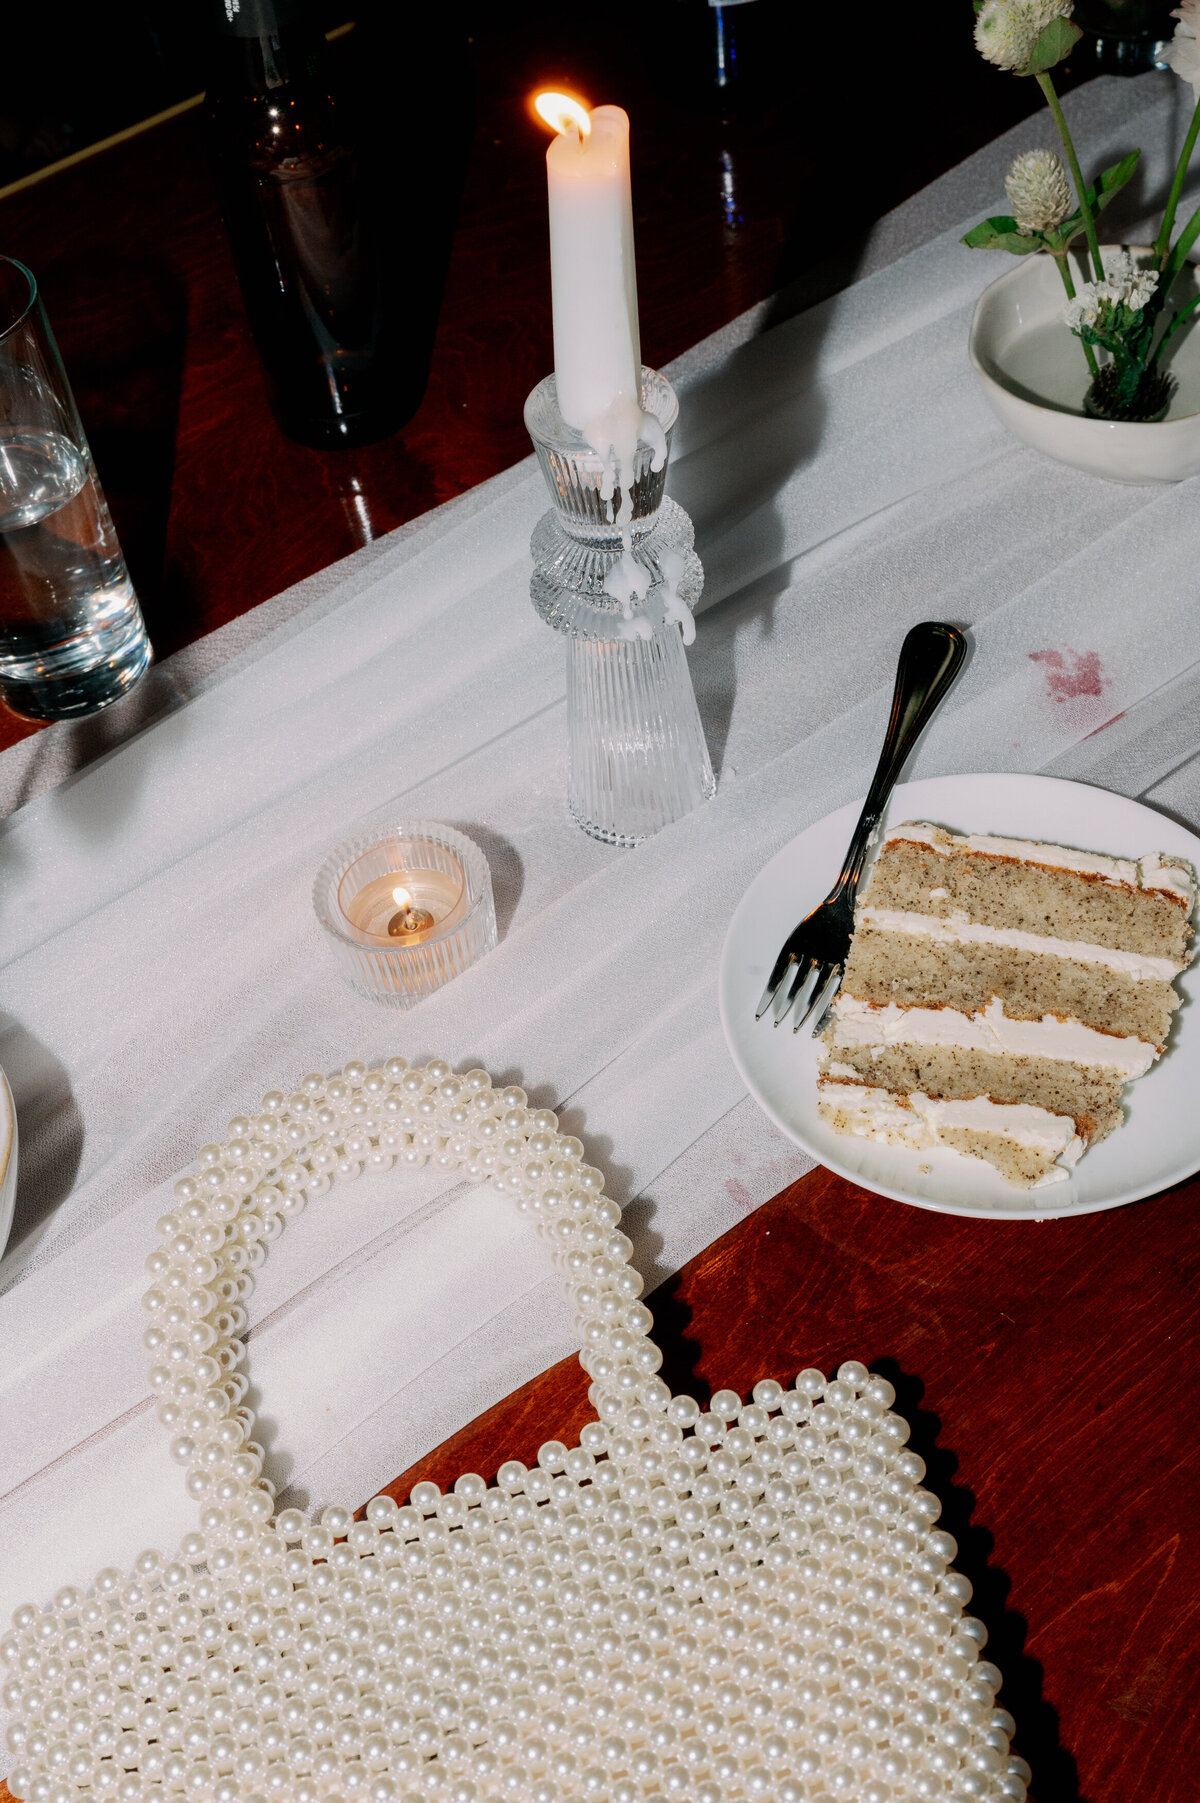 purse and cake on table